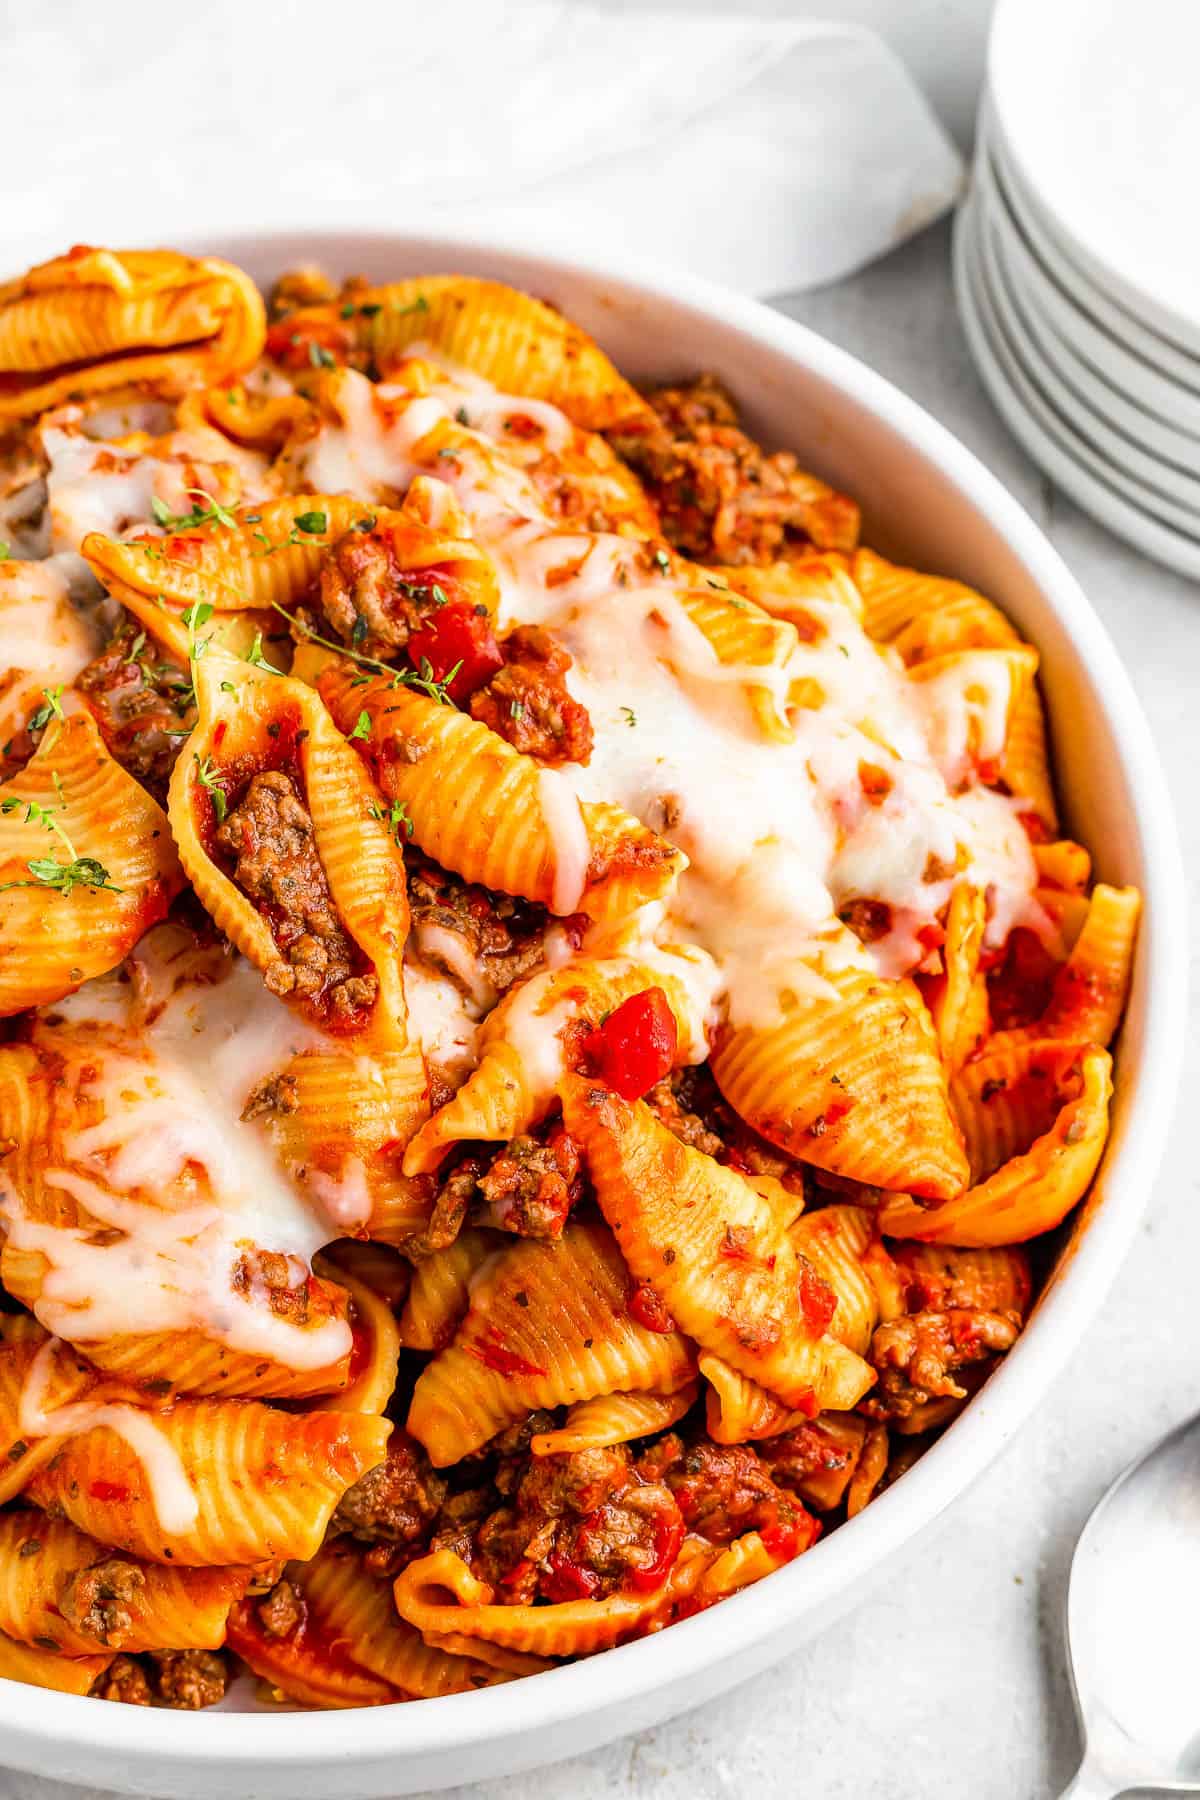 a serving of Instant Pot pasta shells and beef in tomato sauce, topped with melted mozzarella.